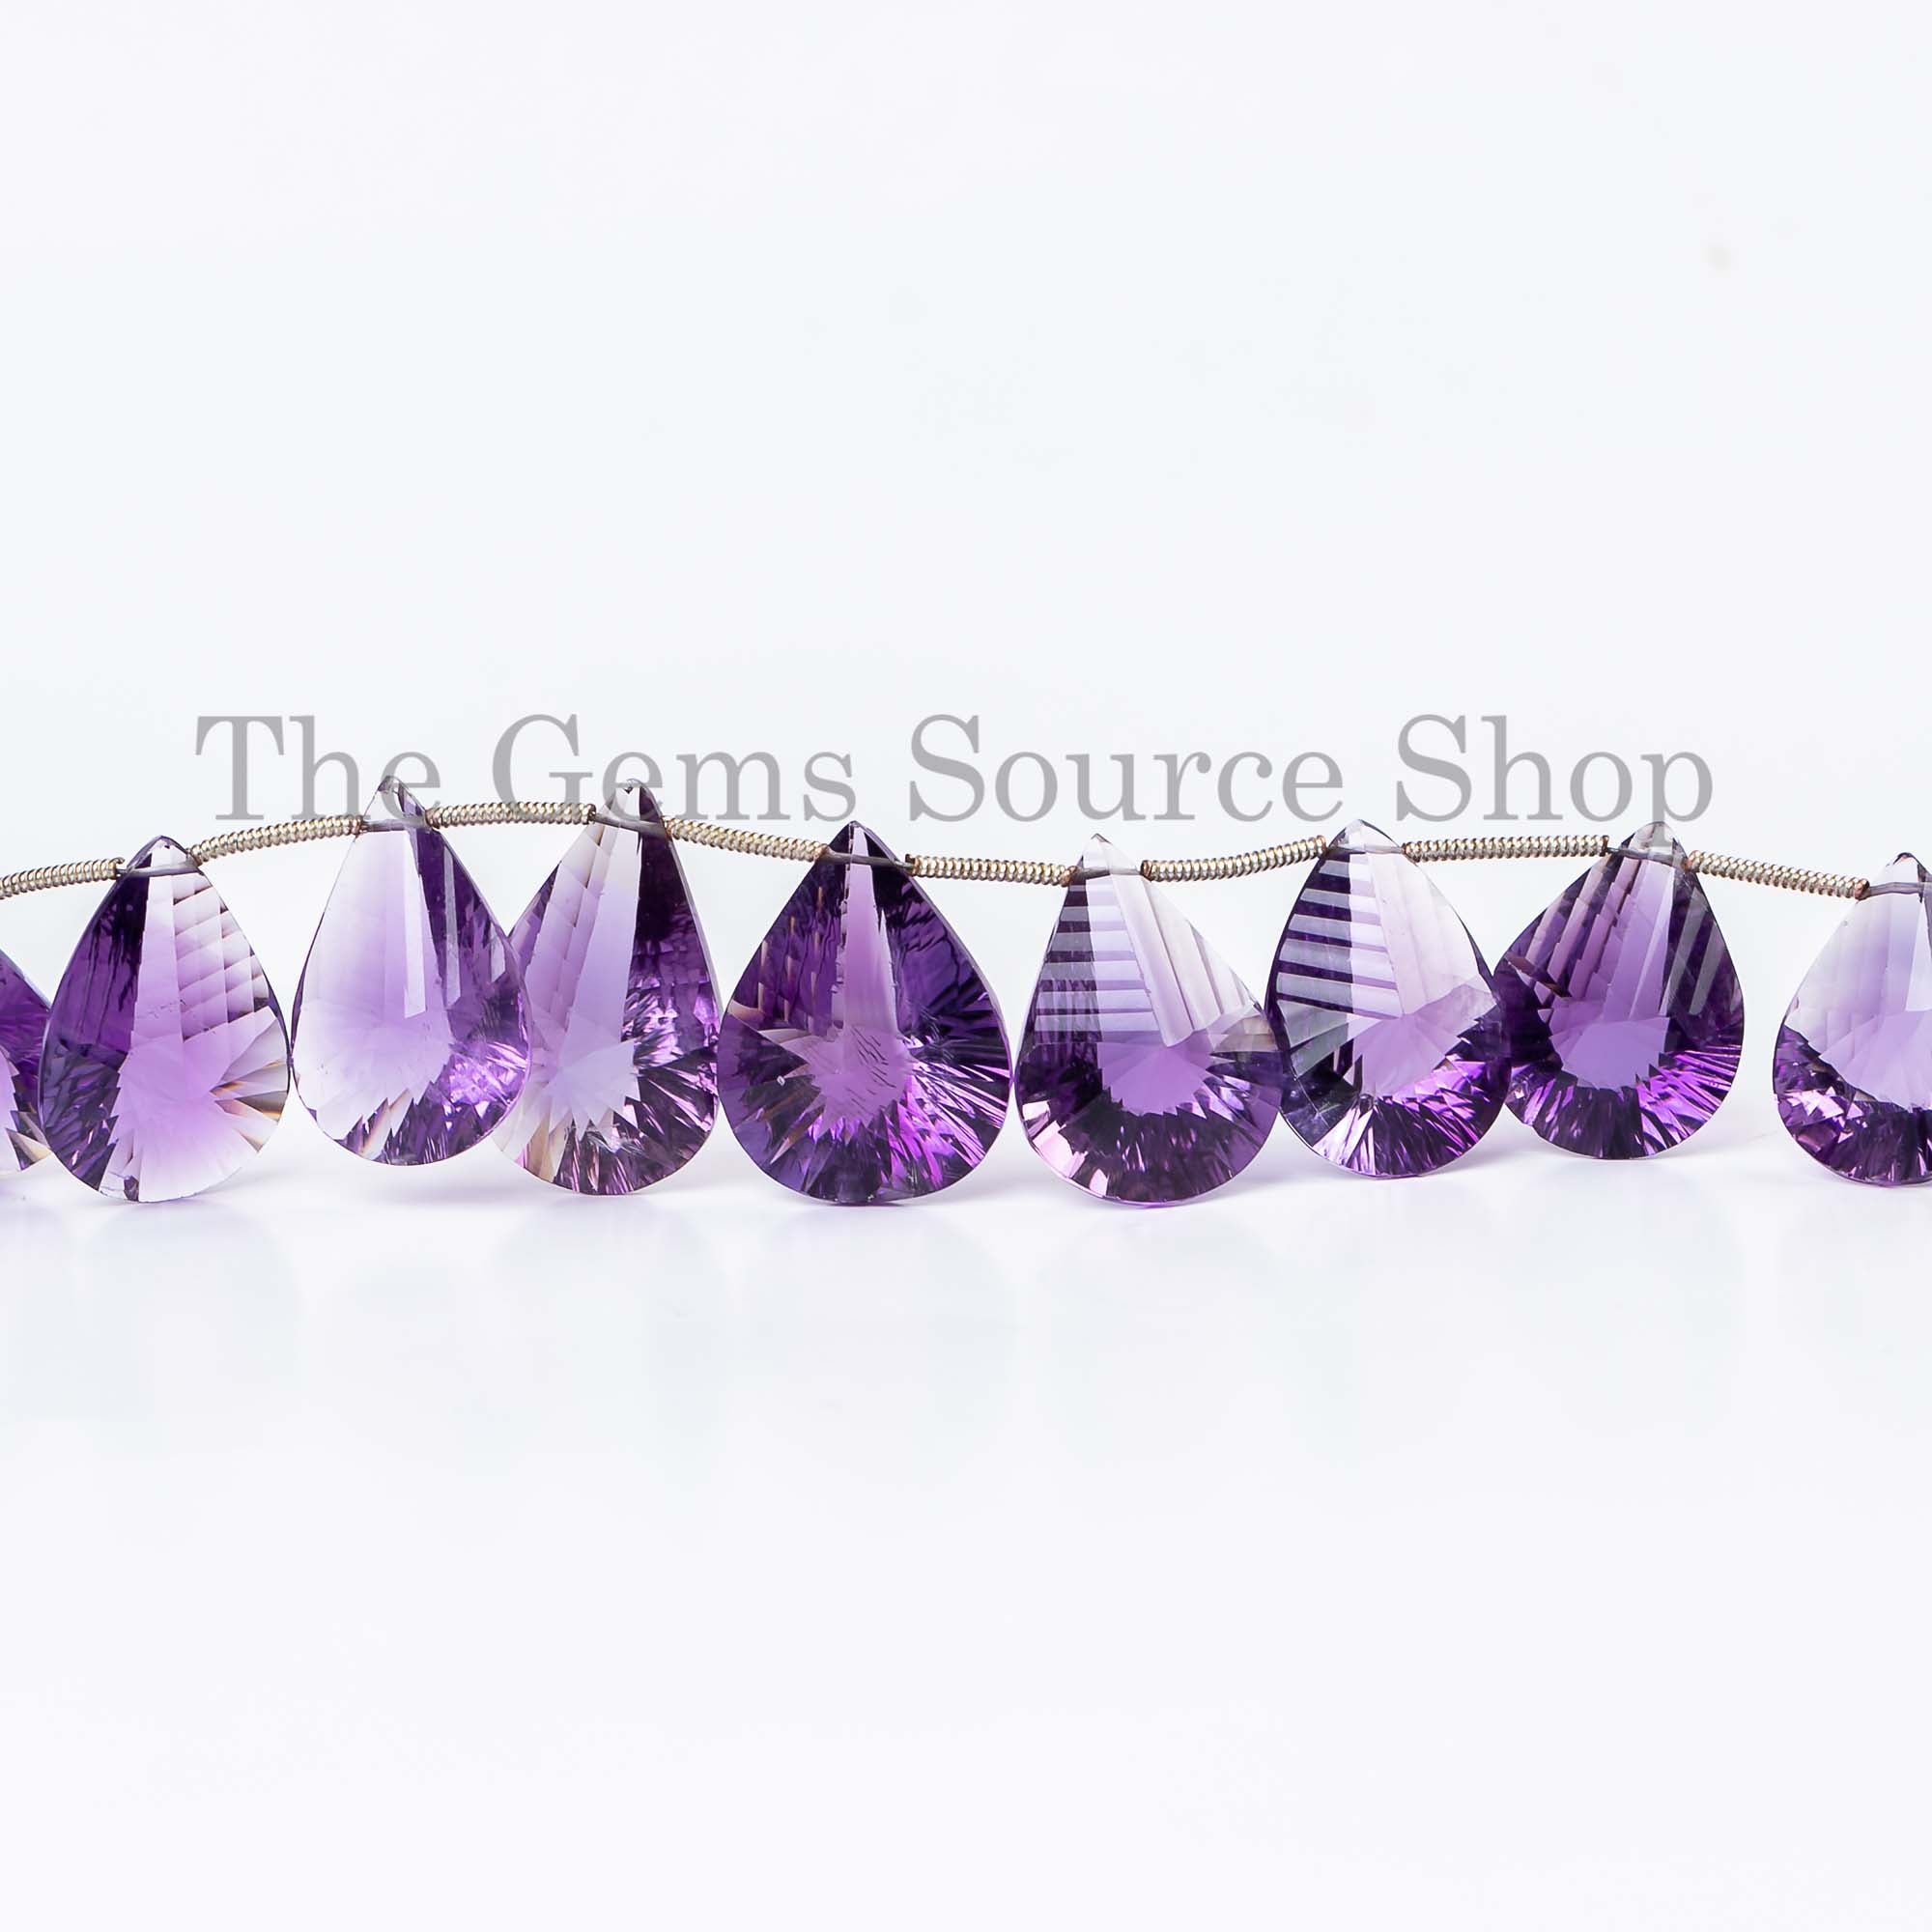 Amethyst Beads, Amethyst Concave Cut Beads, Amethyst Pear Shape Beads, Beads For Jewelry